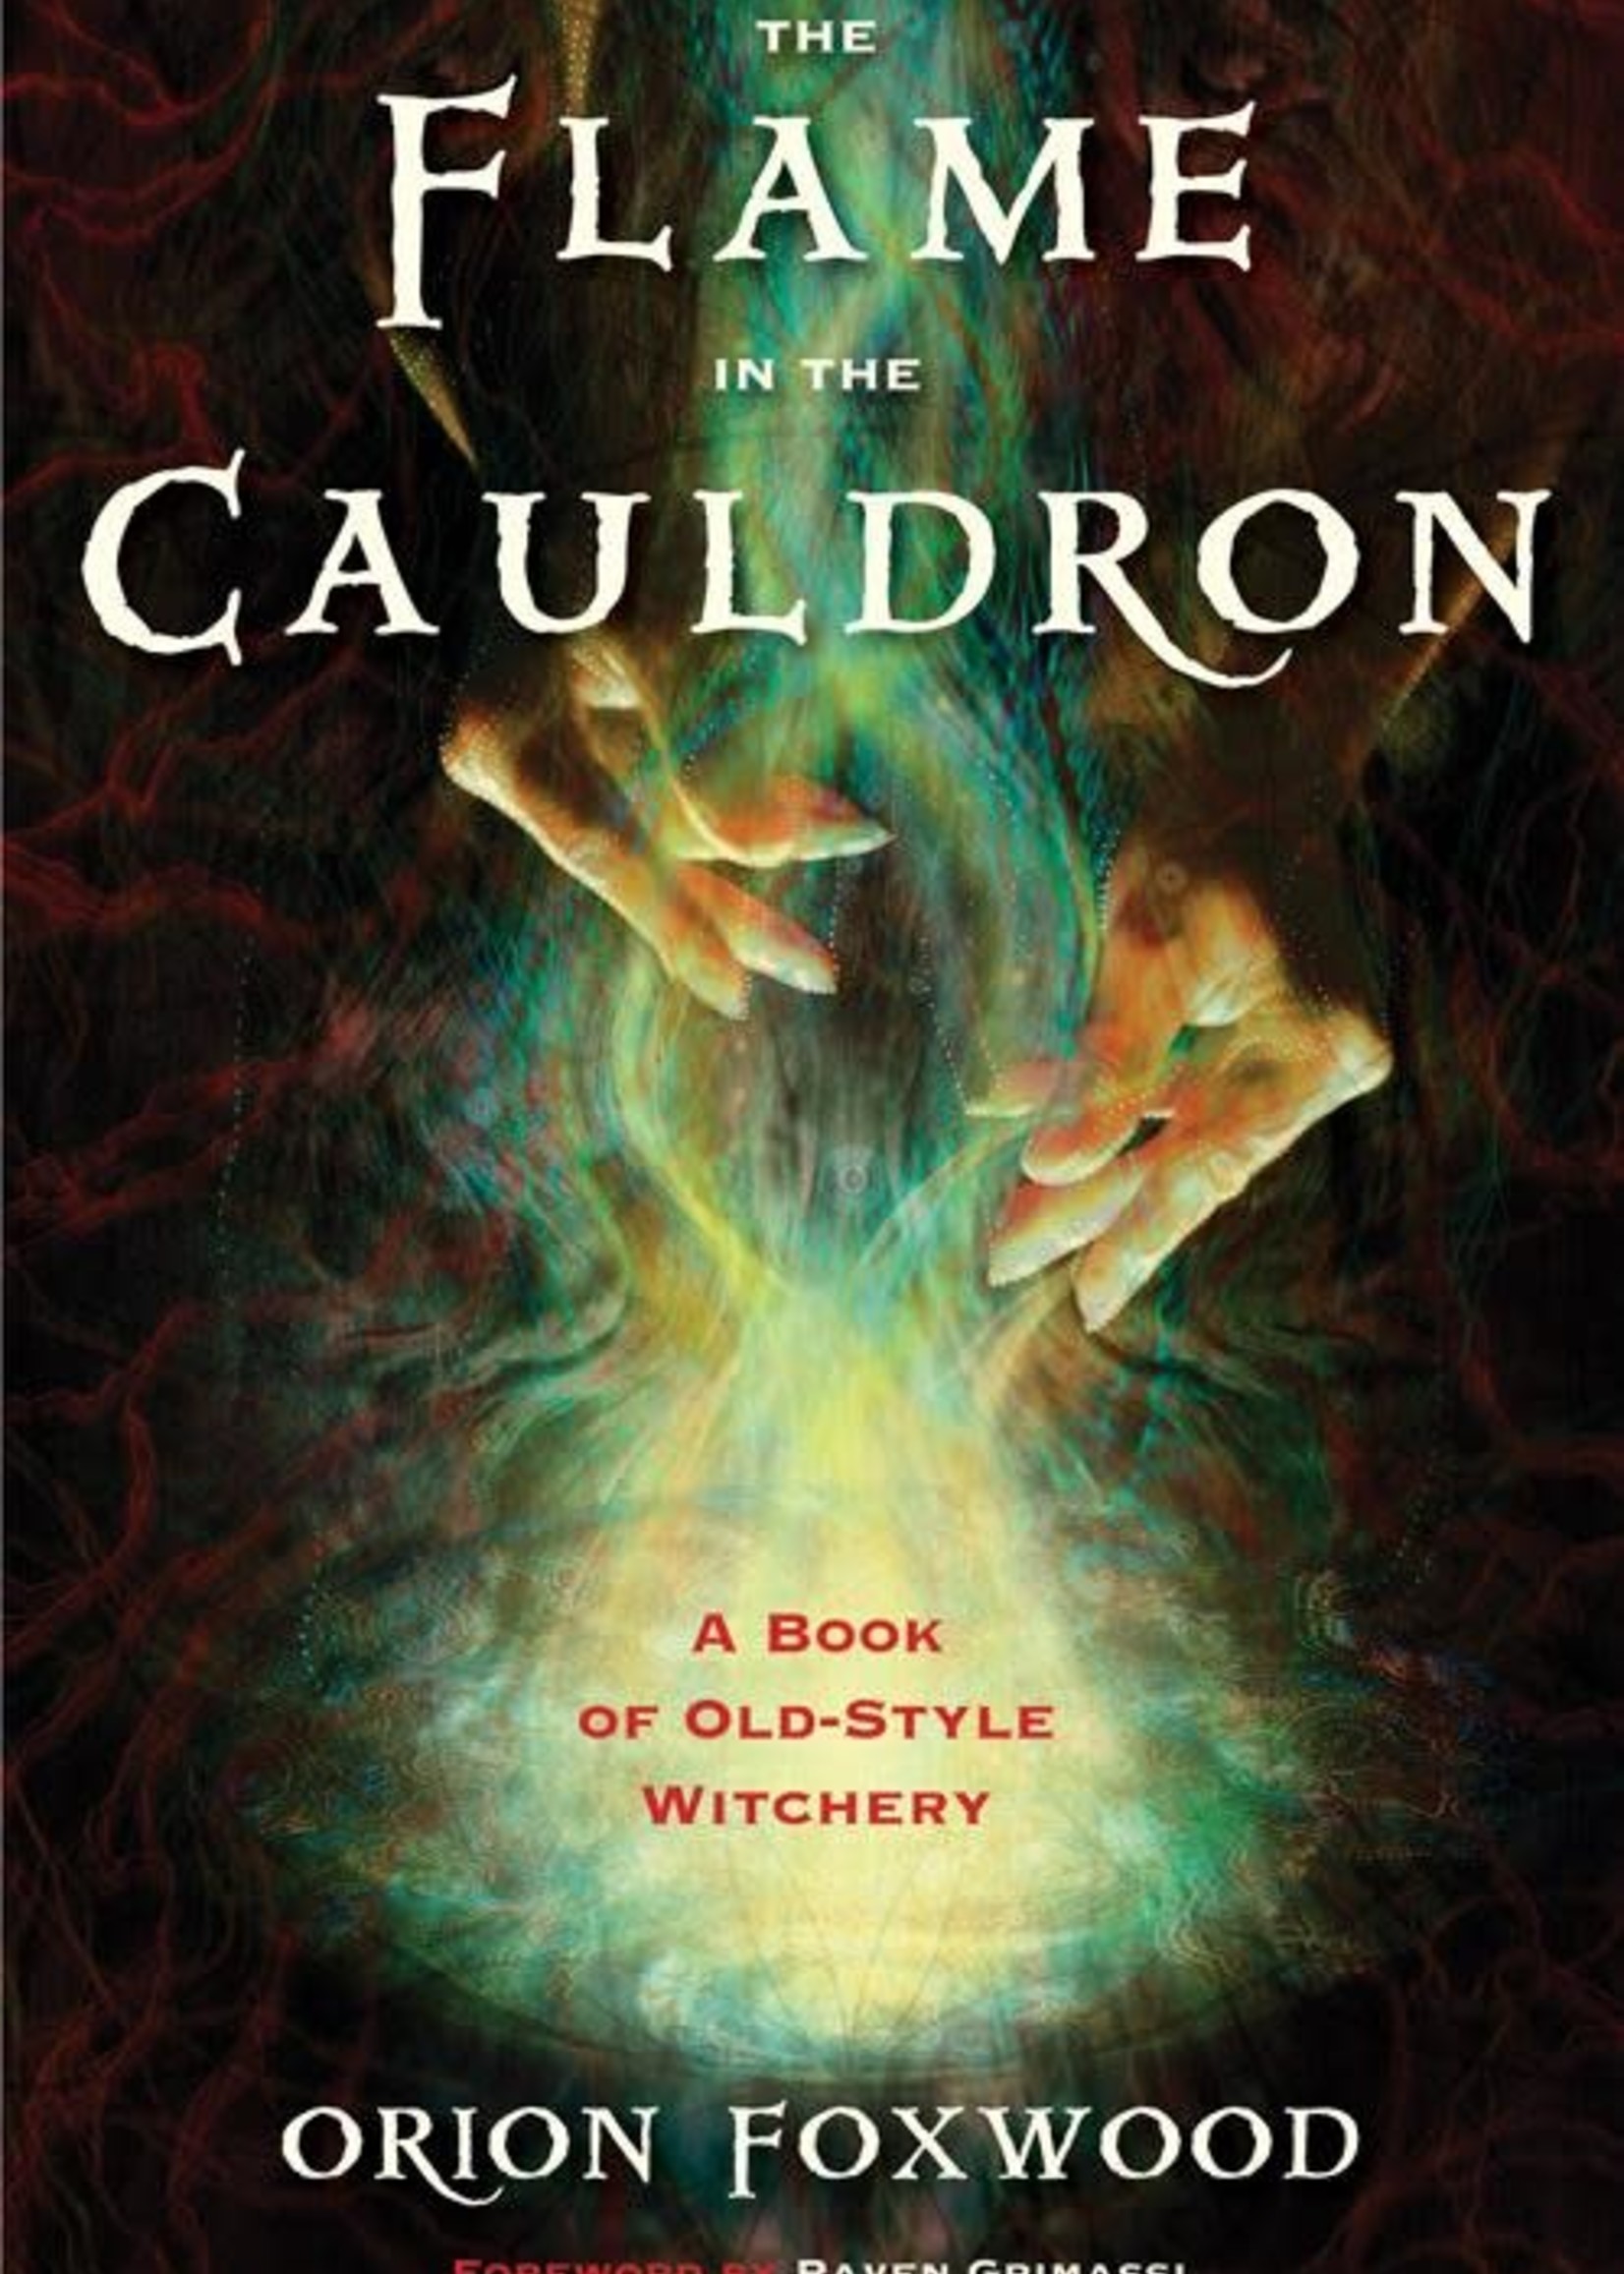 The Flame in the Cauldron (Orion Foxwood)